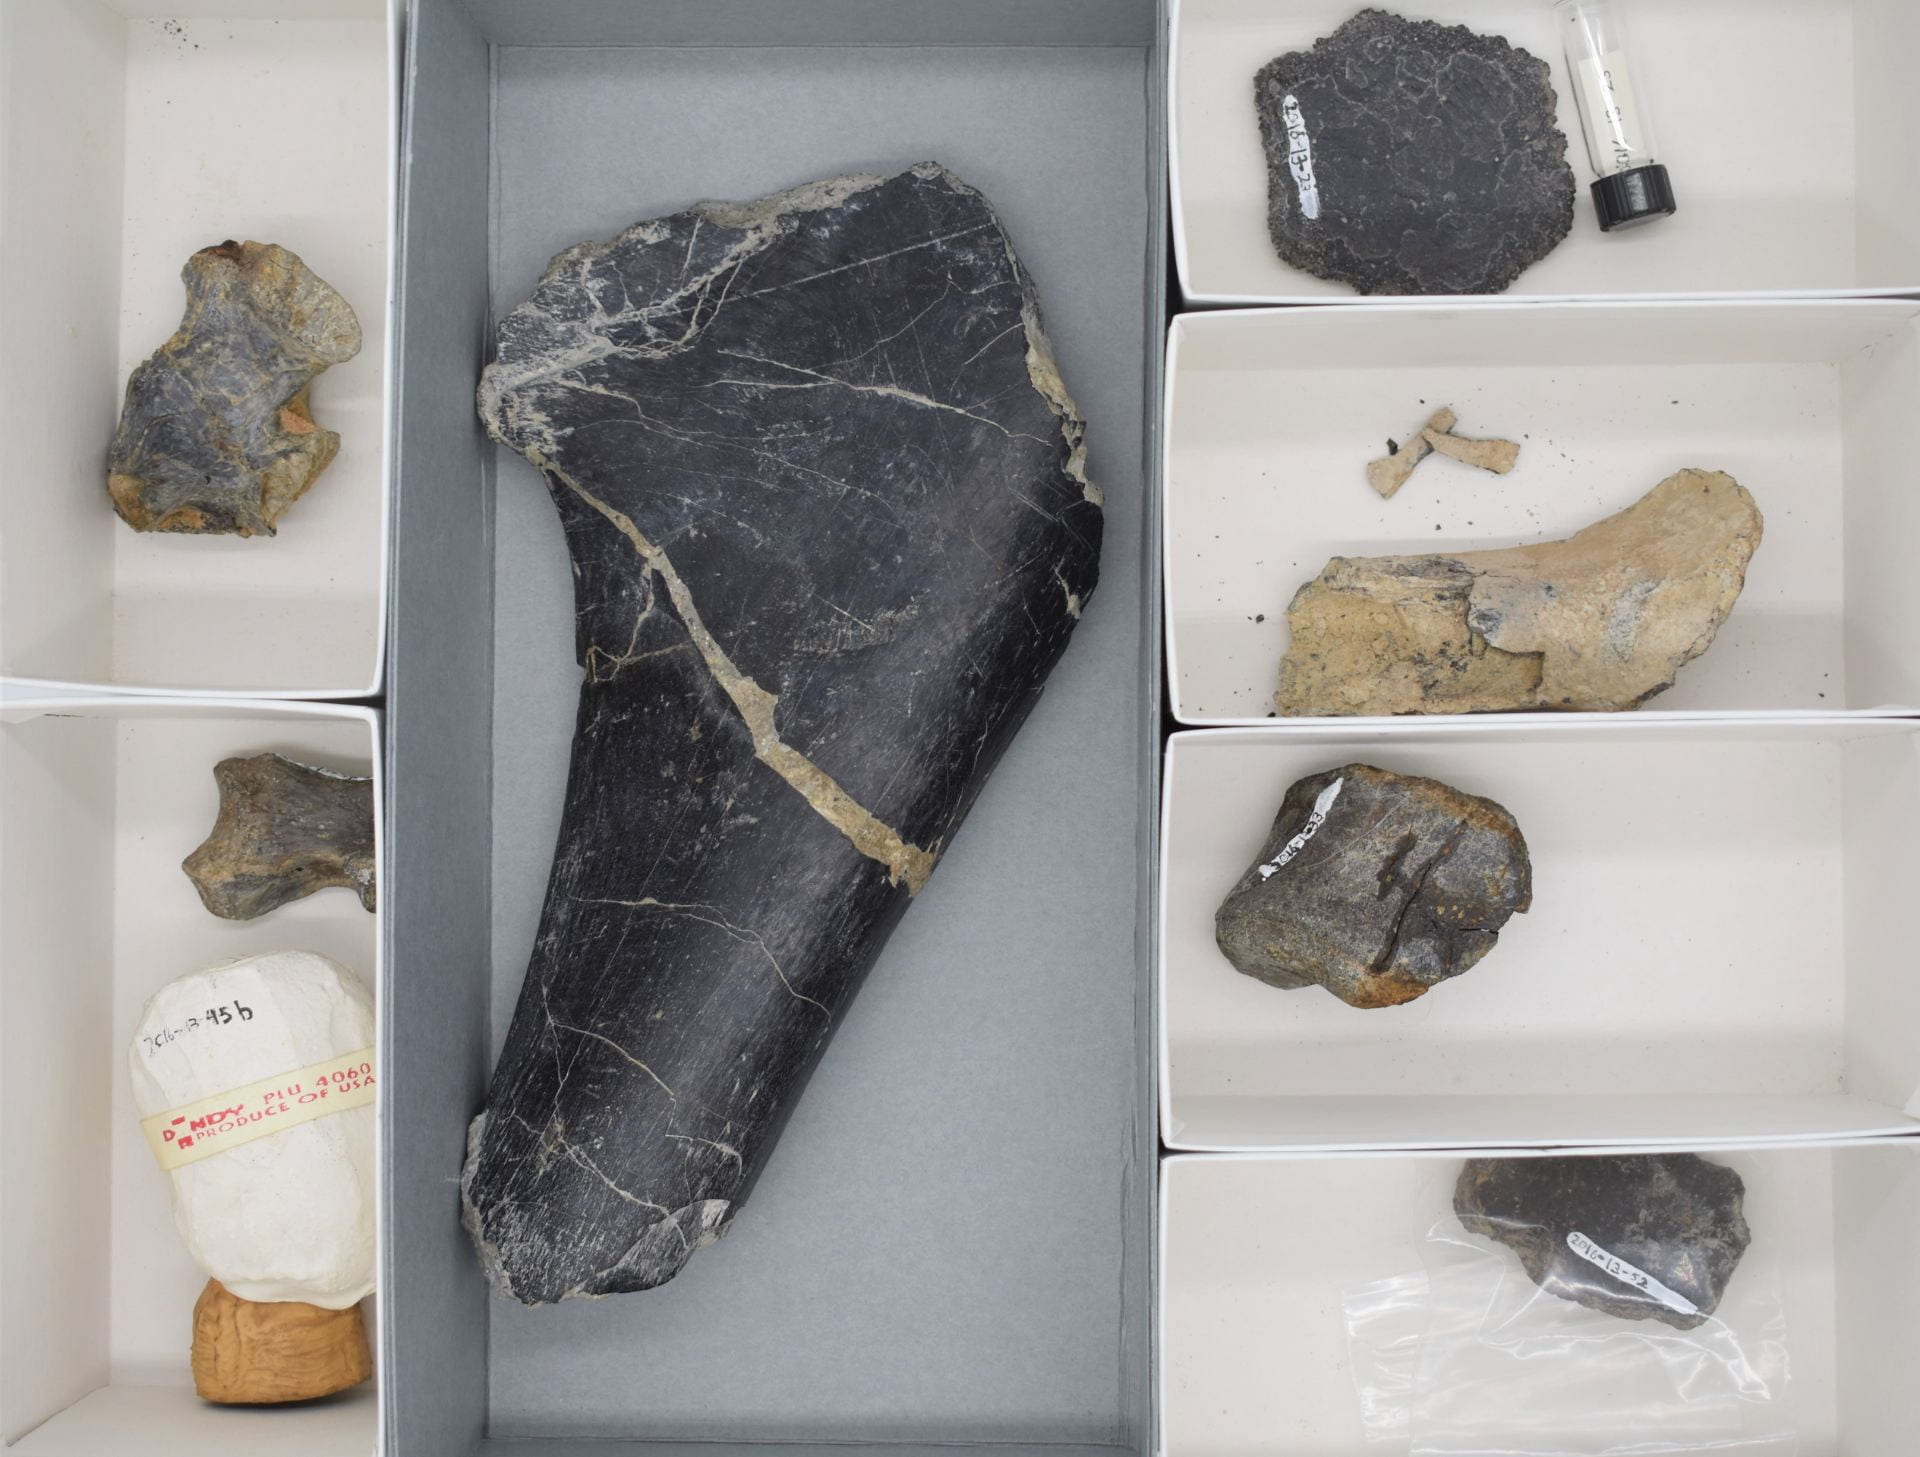 Six fossils of various shapes and sizes viewed from above and in their storage boxes.